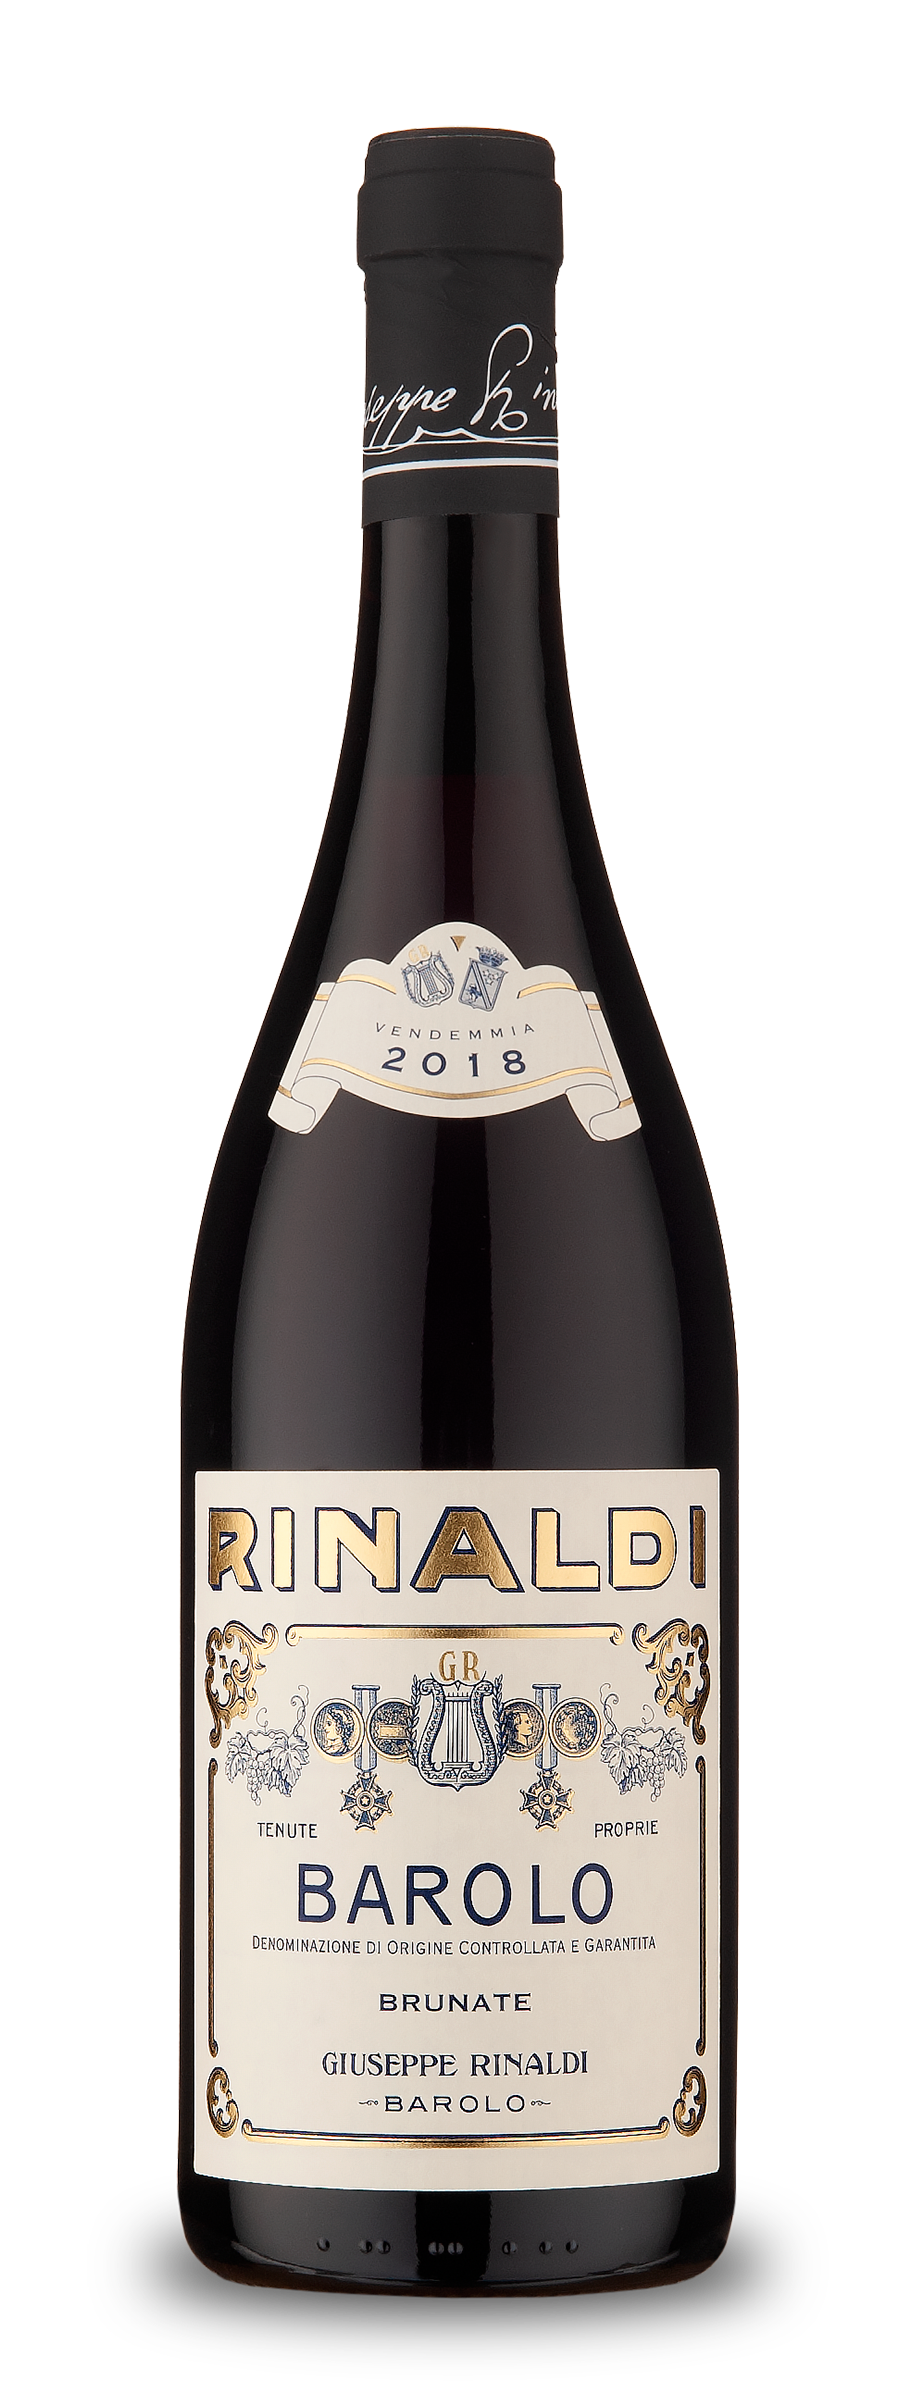 Barolo Brunate 2018 - ONLY ON PRE-ALLOCATION Contact us for further information